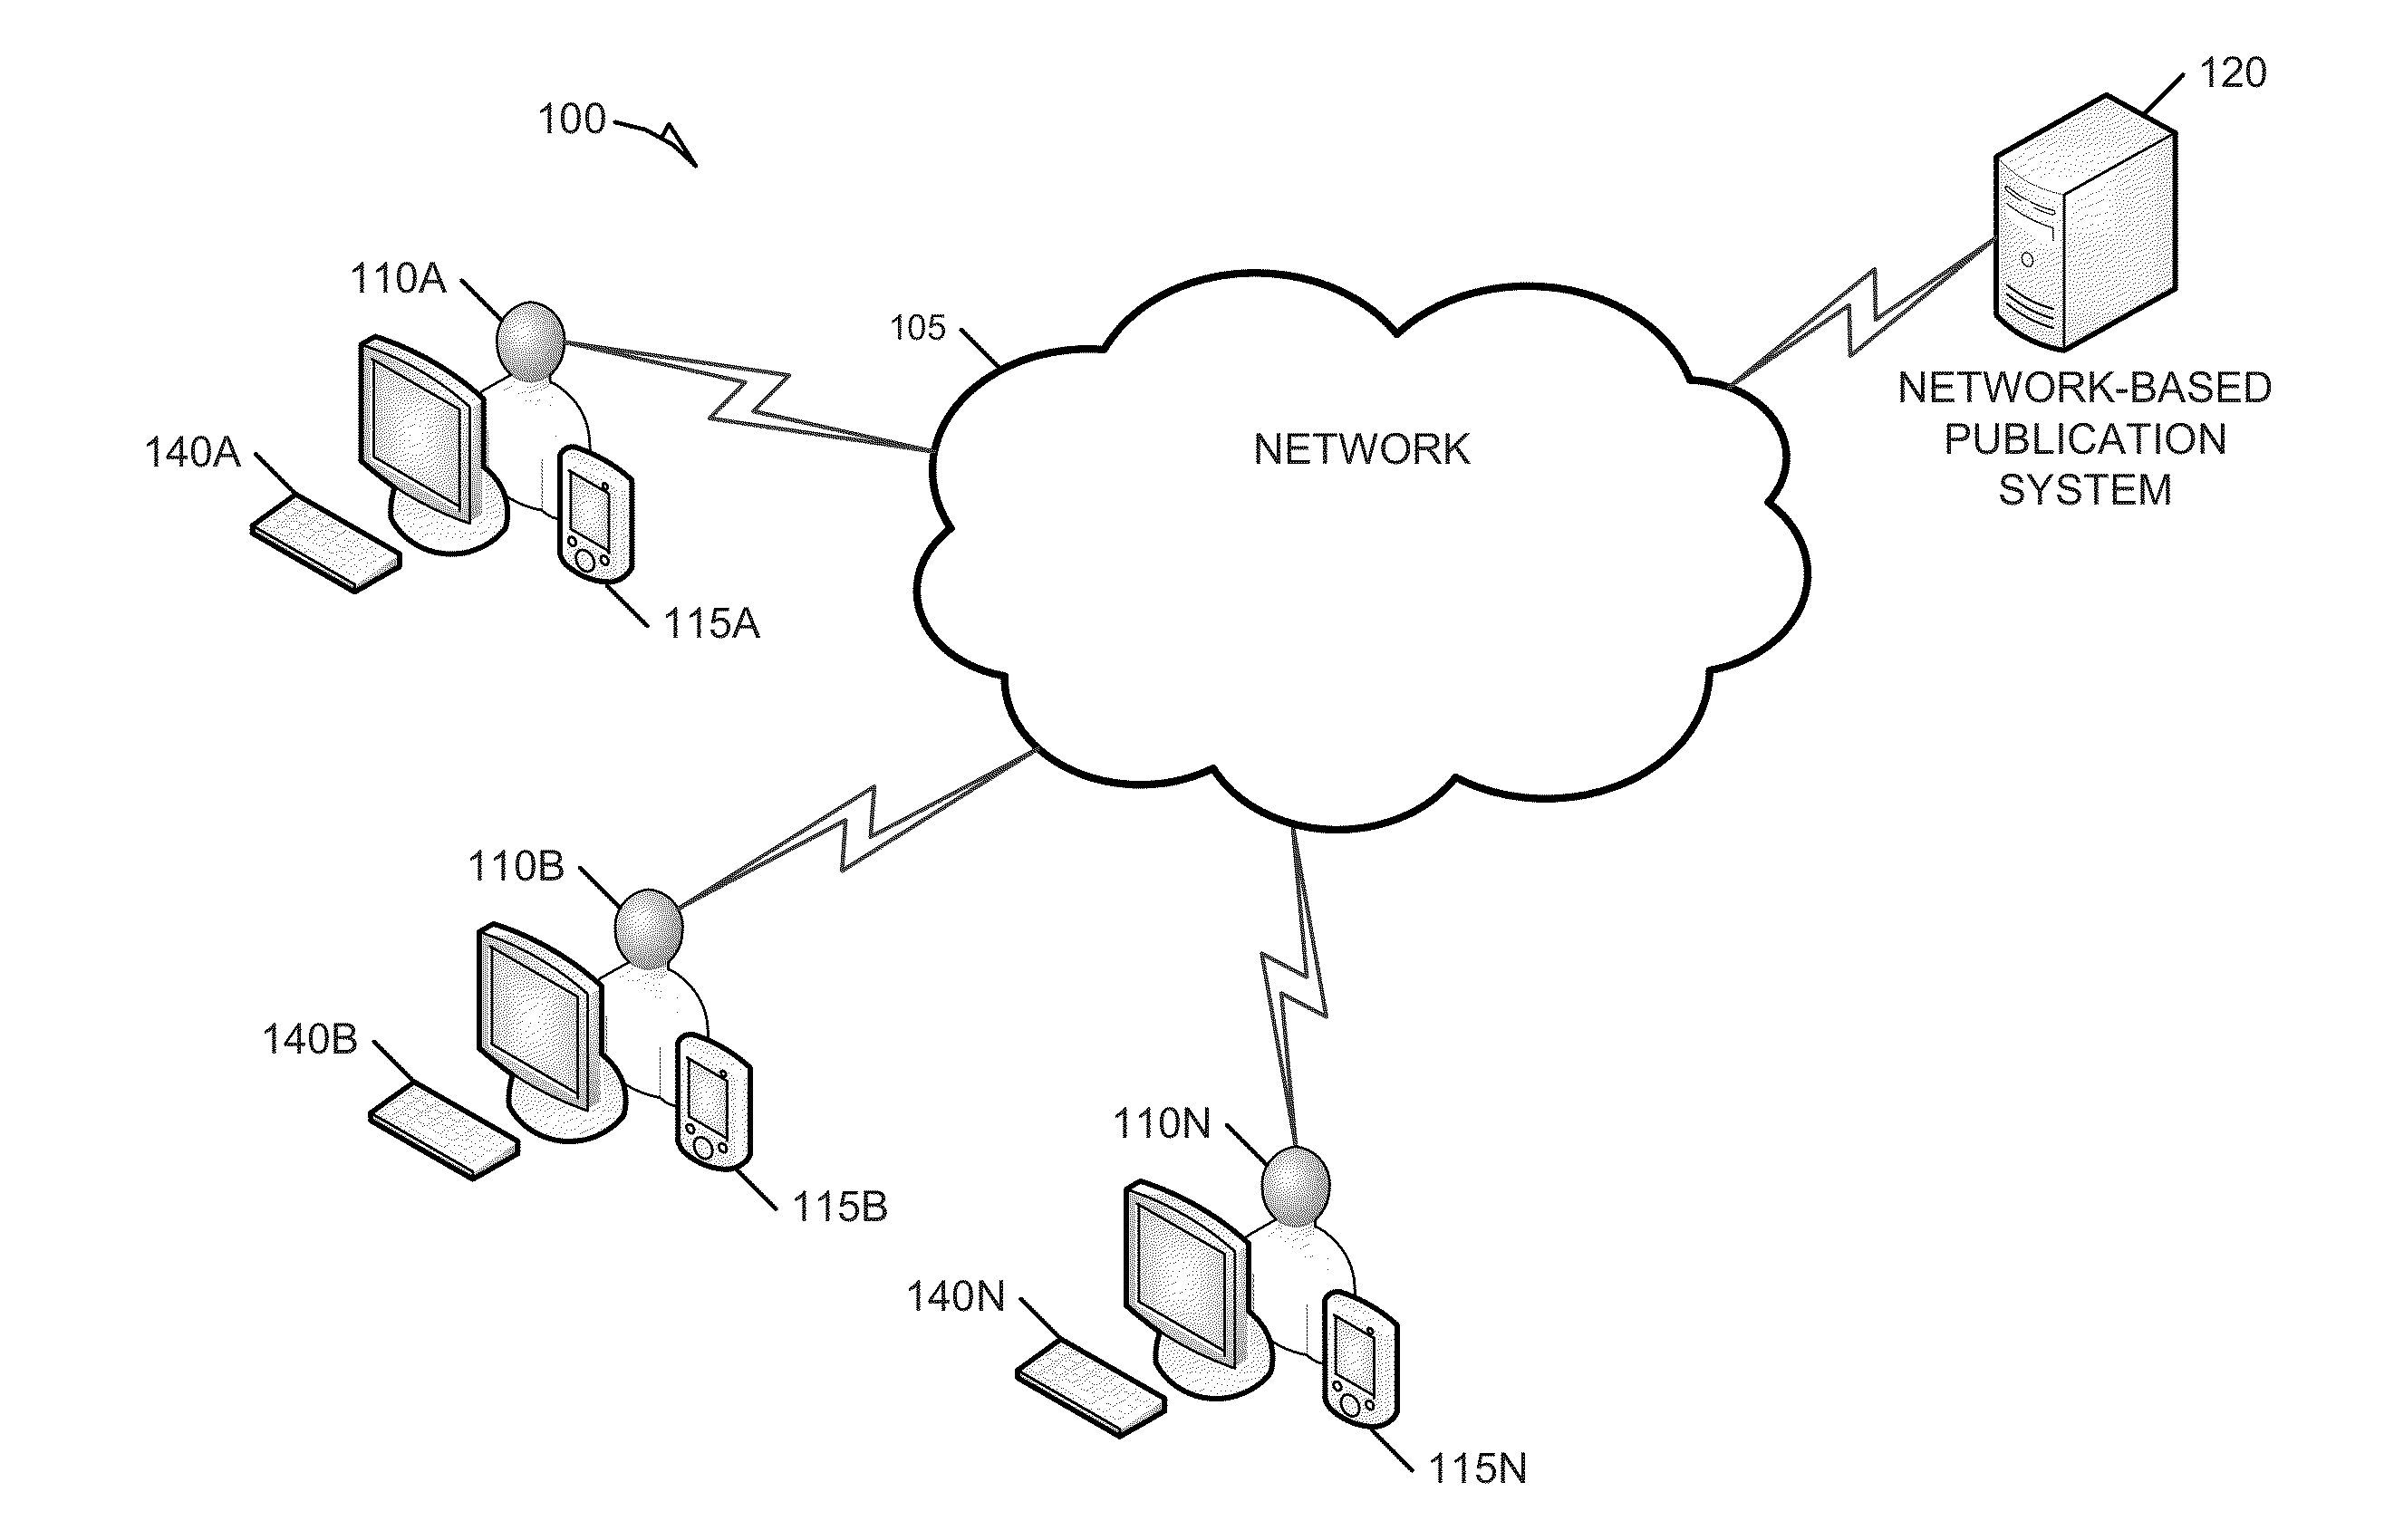 Systems and method for configuring mobile device applicatoins based on location